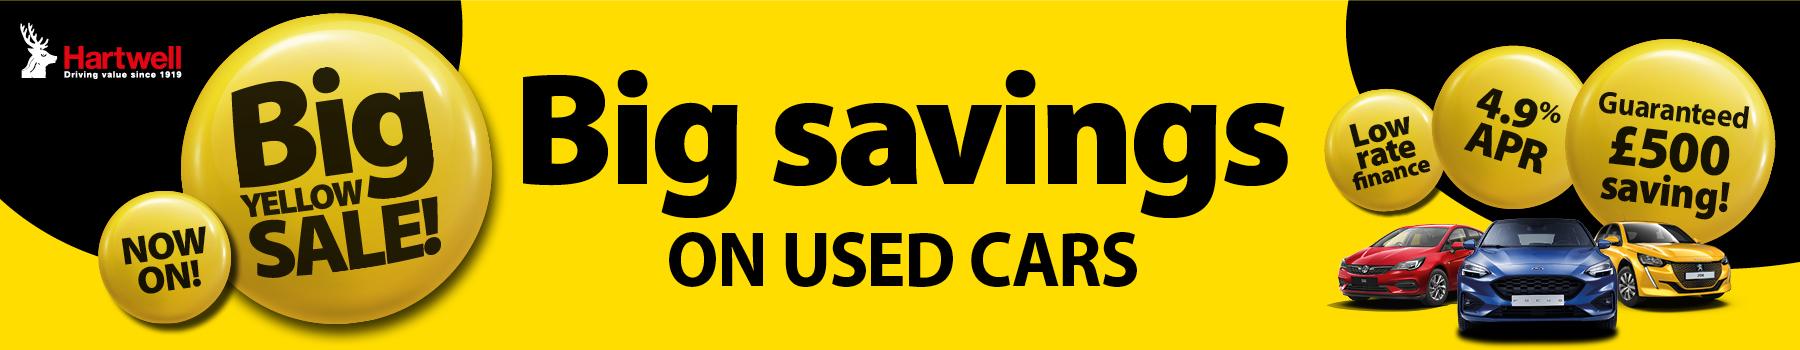 Big Yellow Sale Banner - The Hartwell Big Yellow Sale is Now On with guaranteed savings of £500 and low rate 4.9% APR Representative Finance